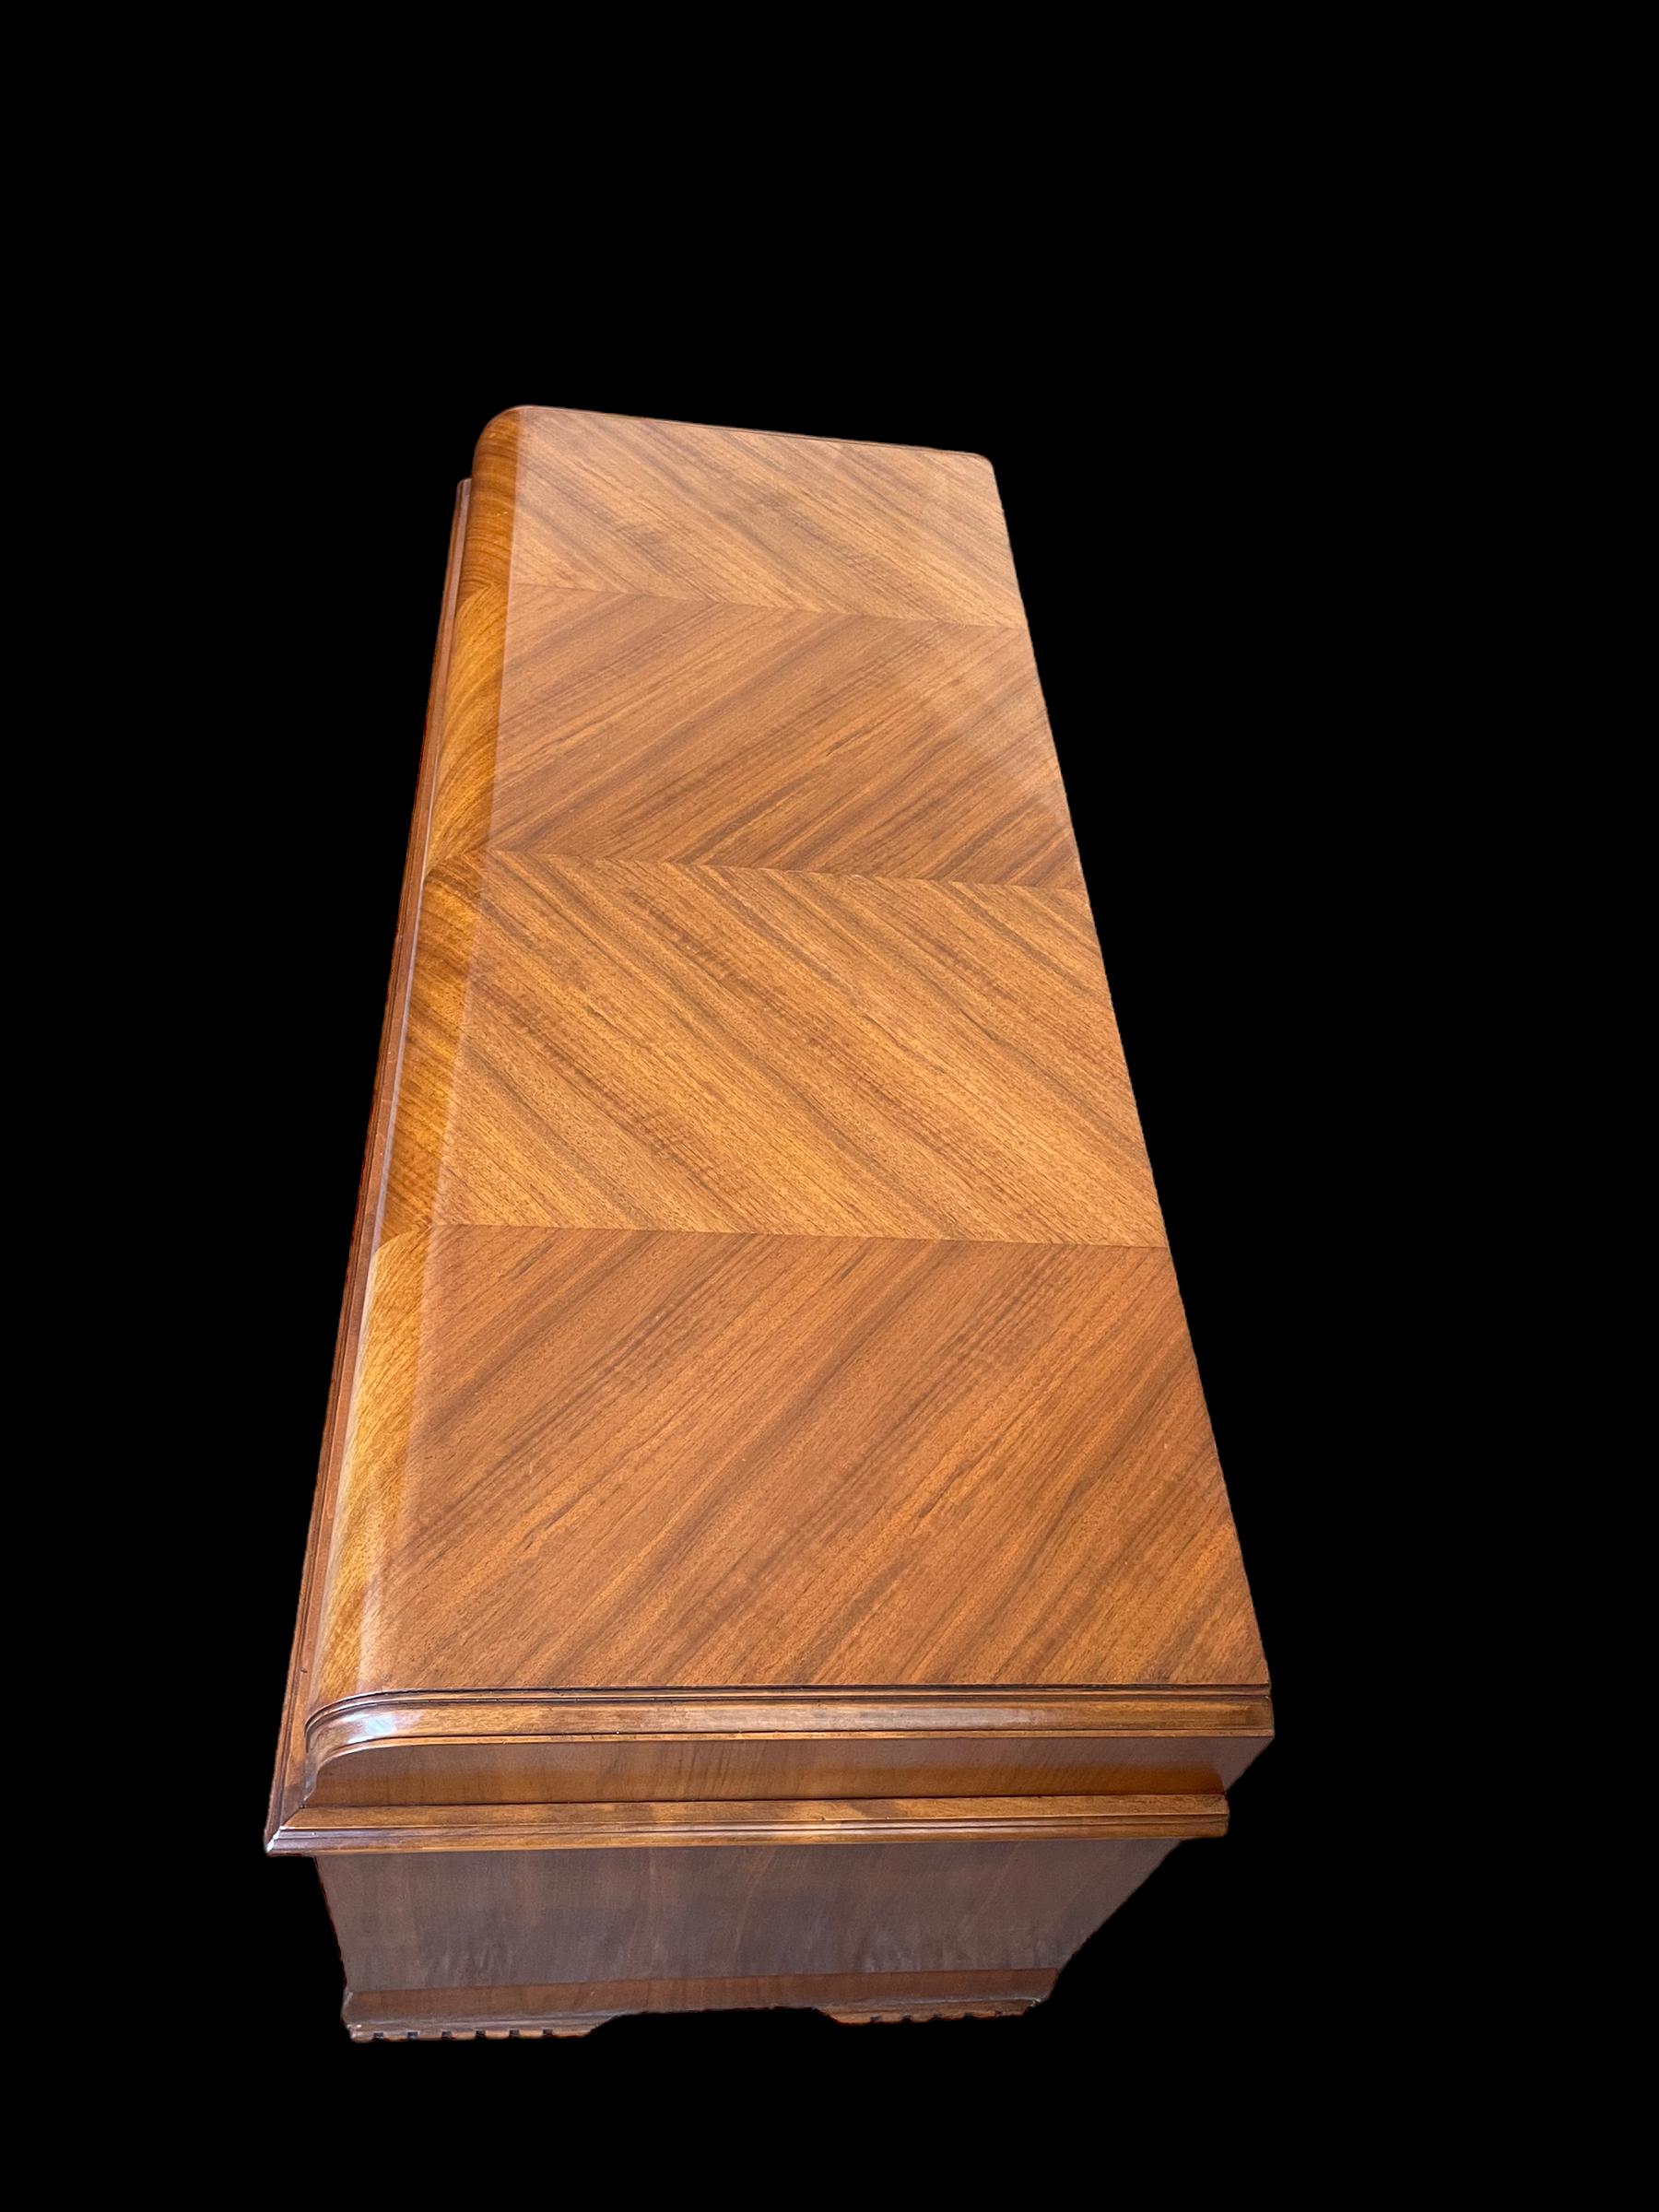 A quality Art Deco cedar wood blanket box by the renowned American Lane Company.
Superb walnut detailing, with original locking mechanism and retaining its paper marketing labelling, although the guarantee expired in September 1945!
The box opens